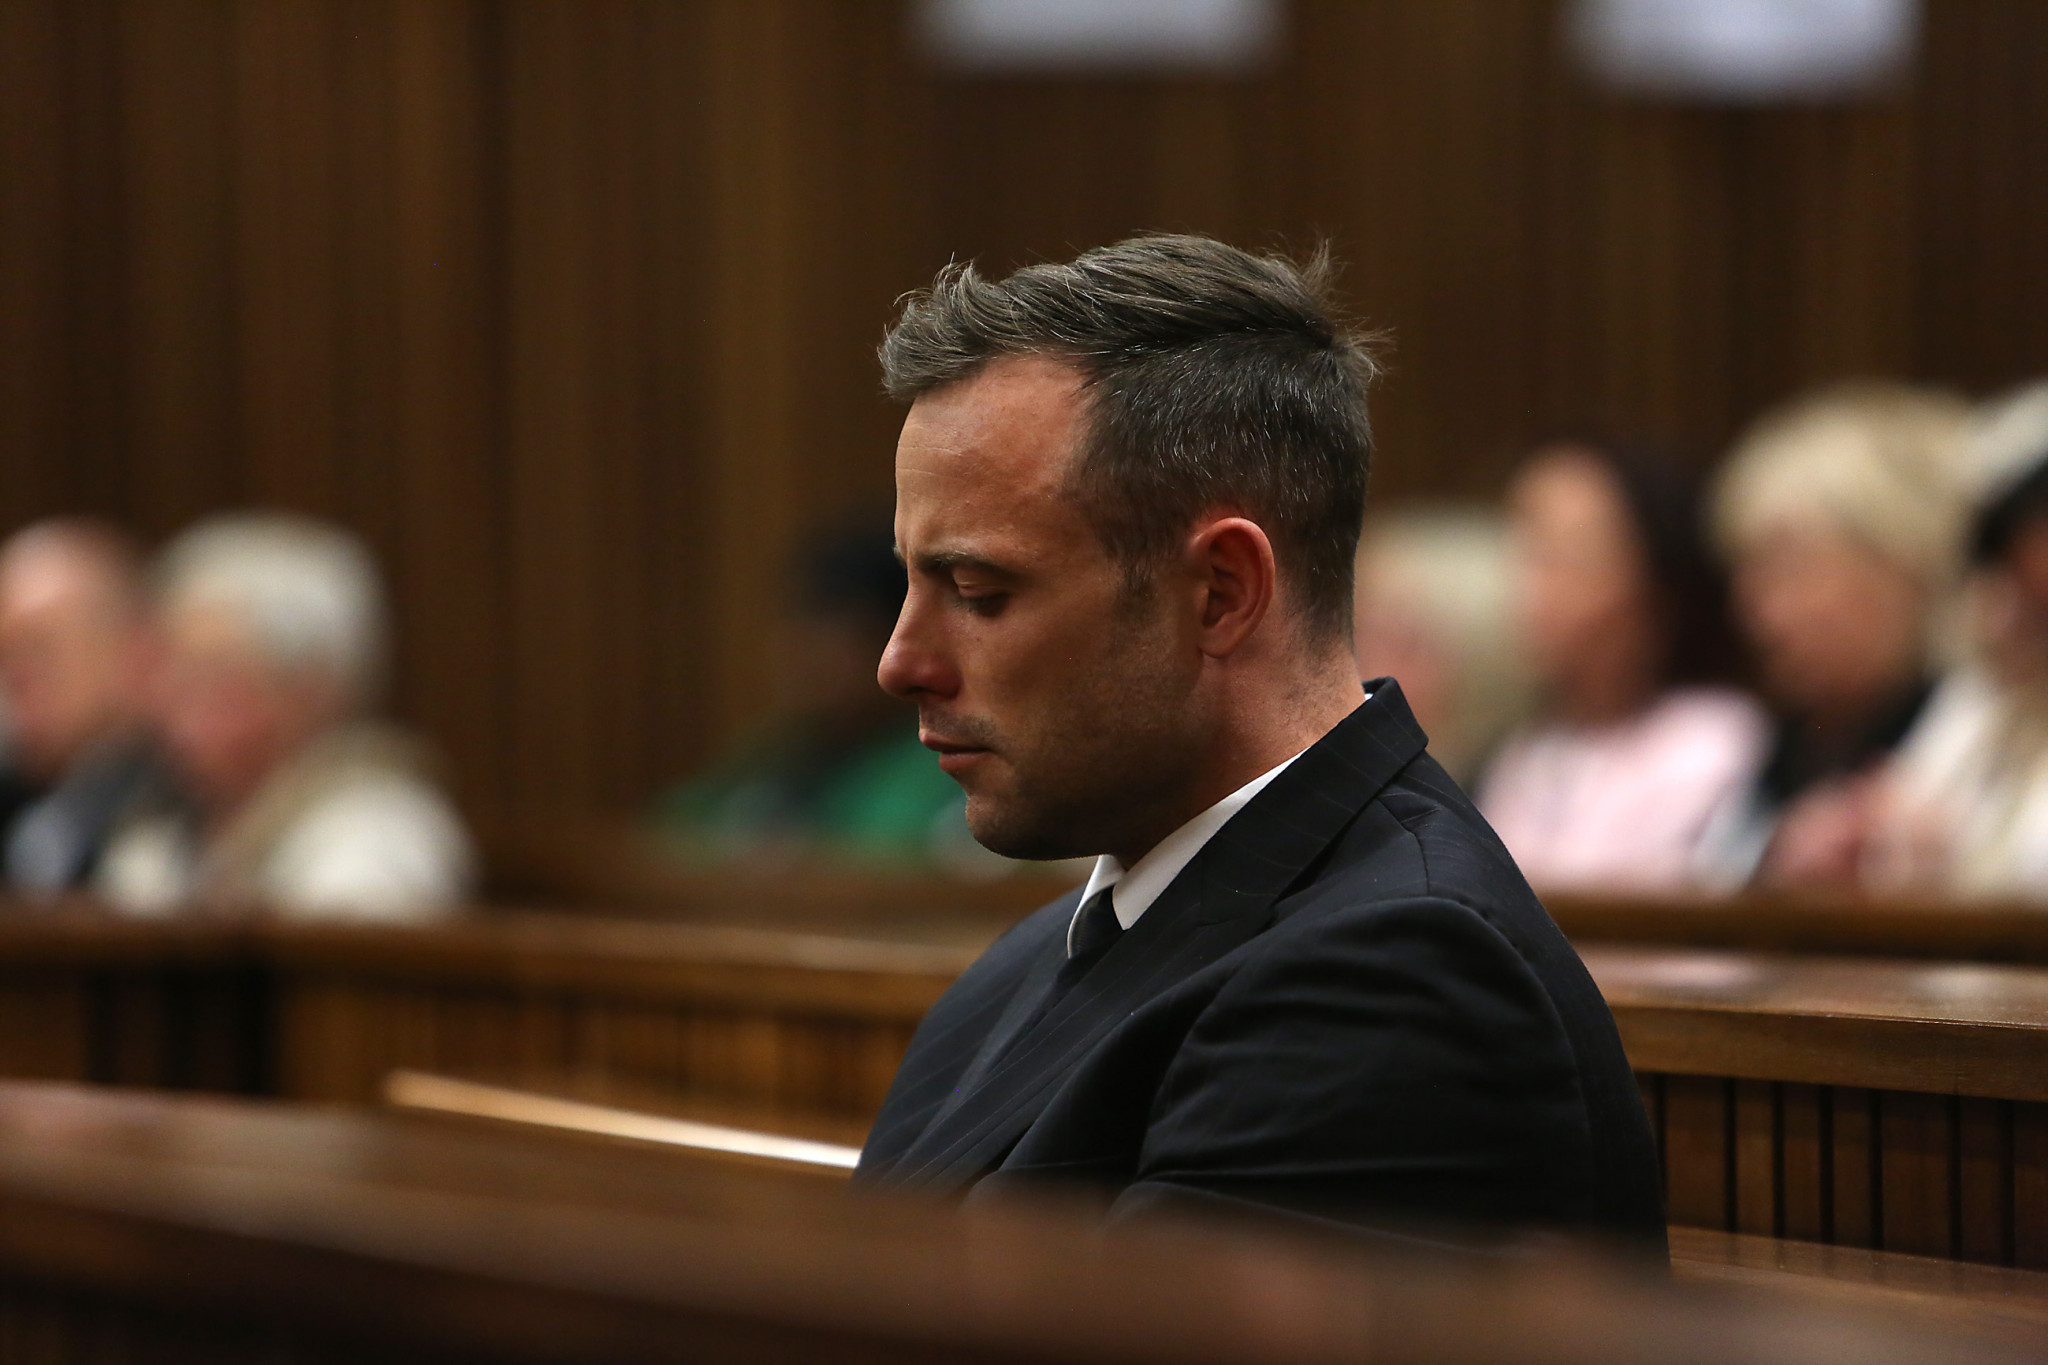 Disgraced Paralympic champion Oscar Pistorius is eligible for parole after serving half of his 13-year jail sentence for murdering his girlfriend Reeva Steenkamp ©Getty Images